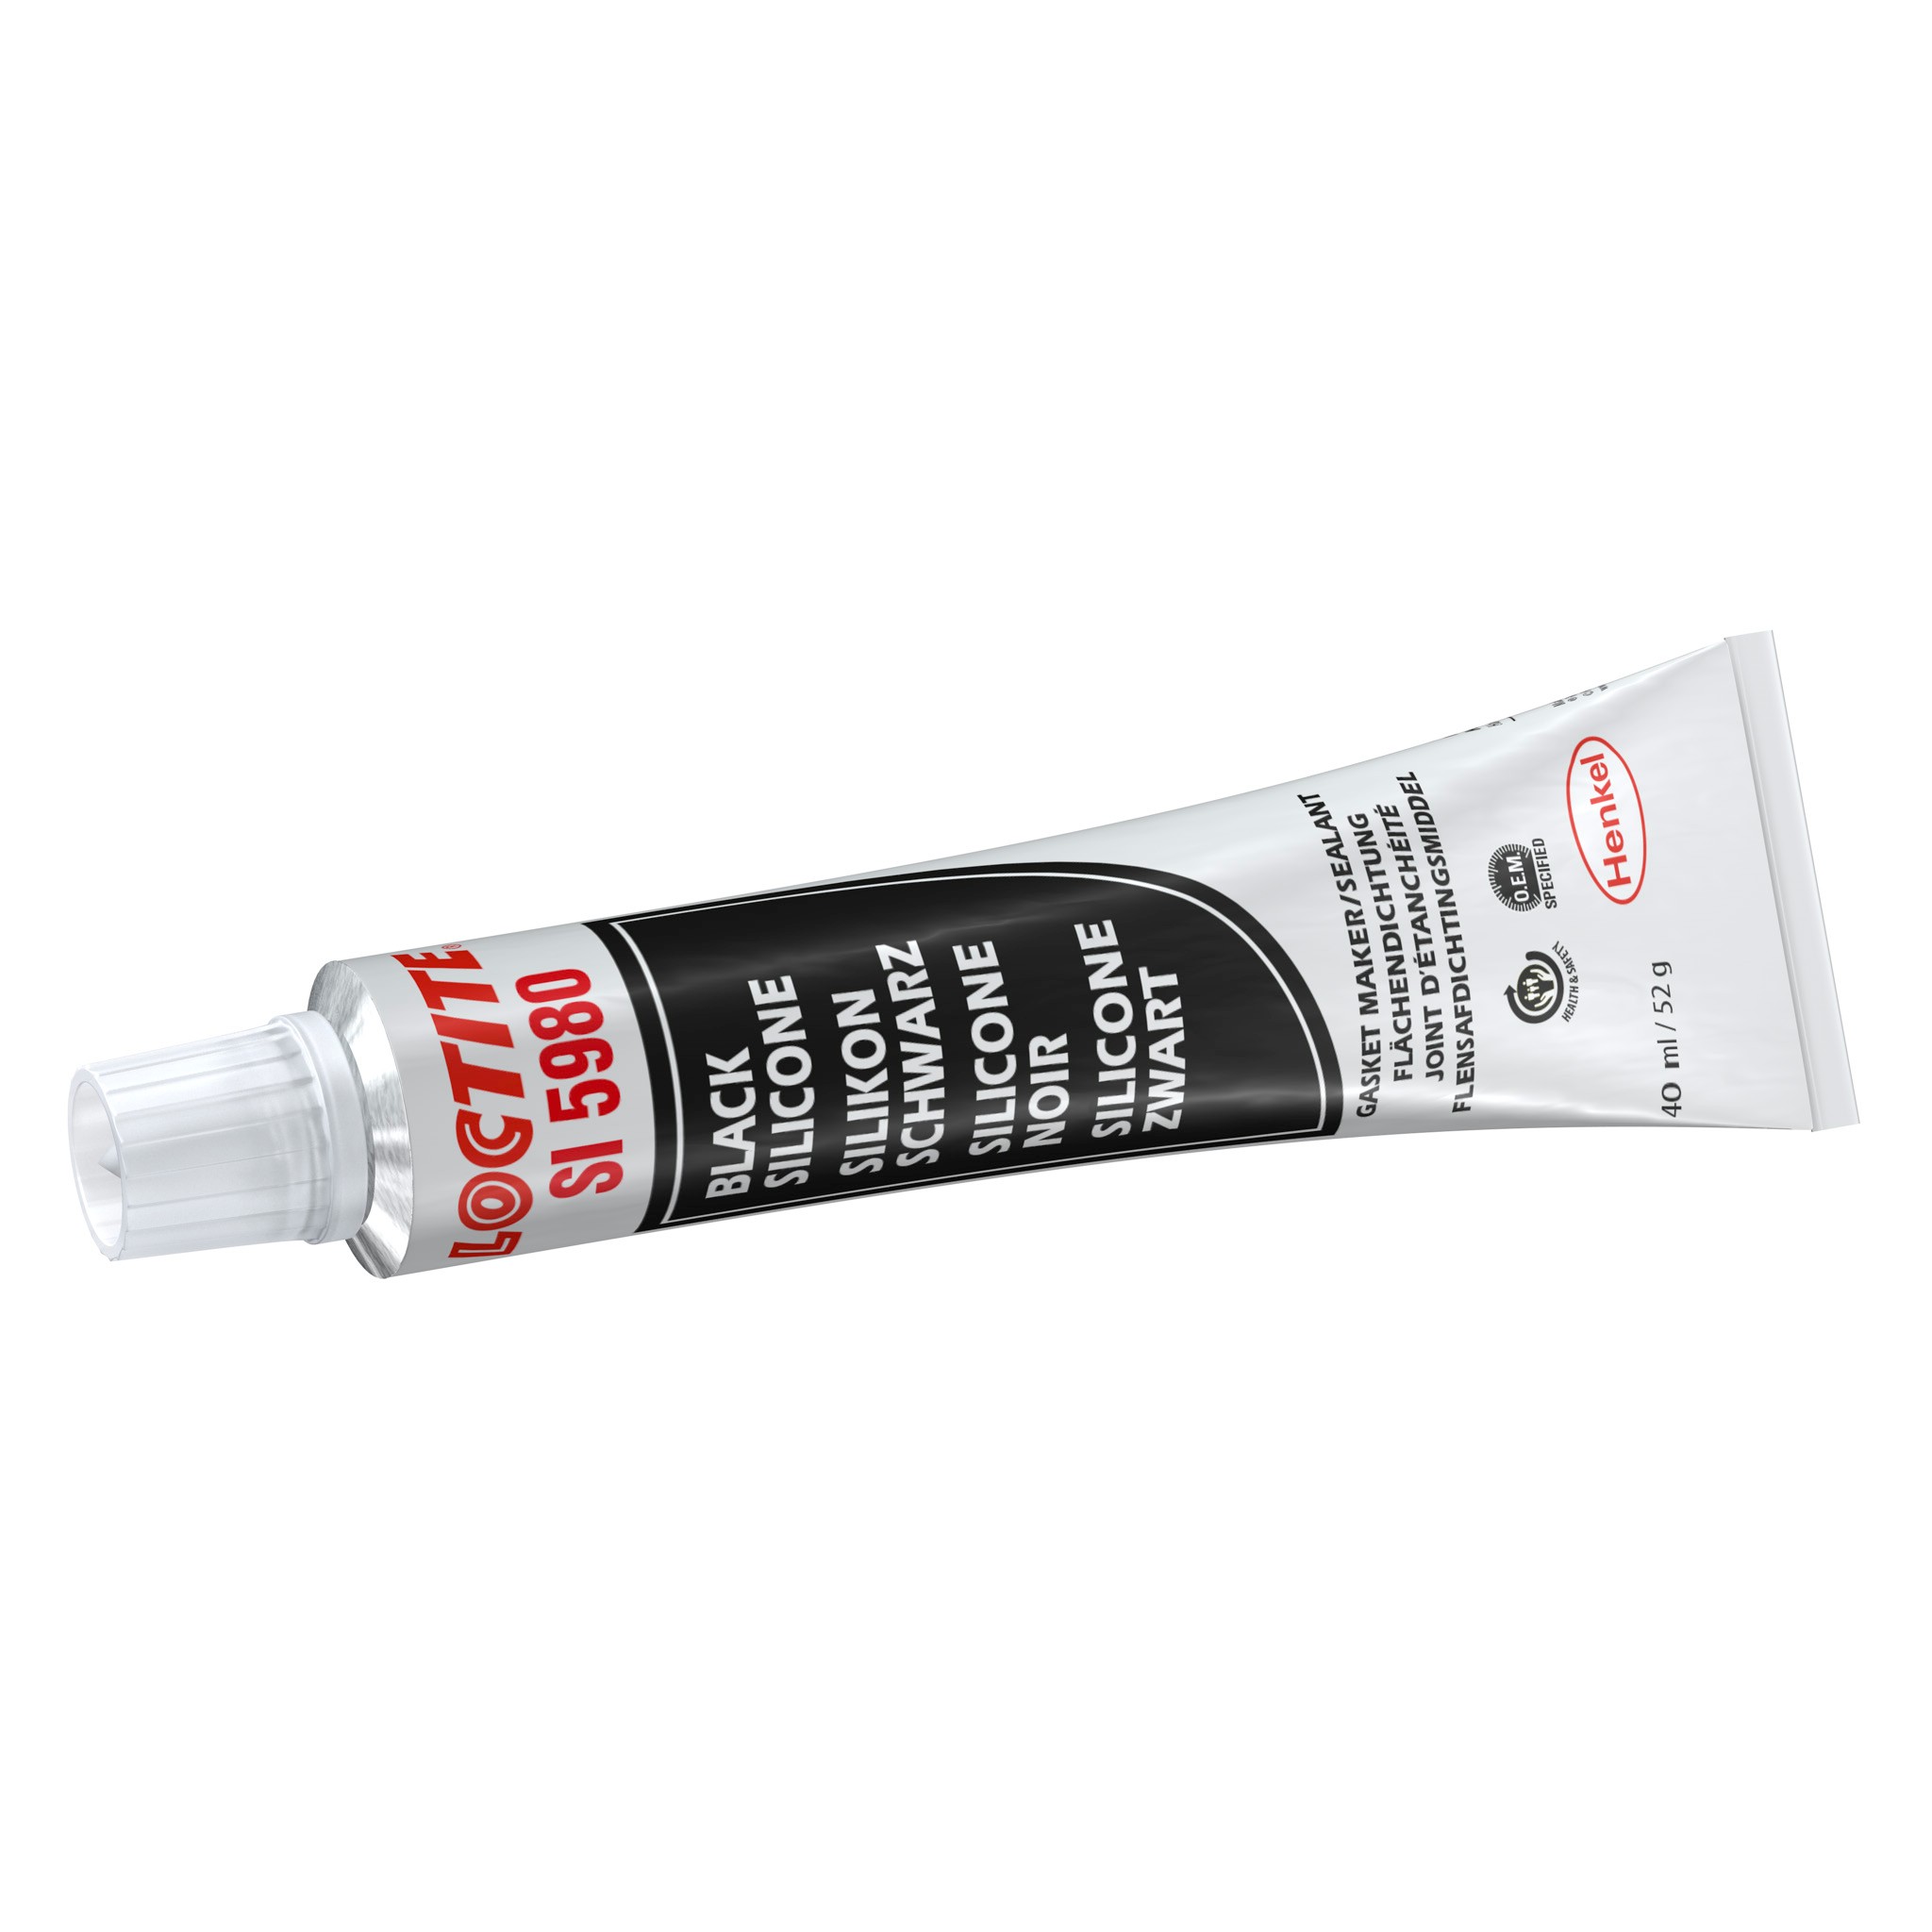 LOCTITE SI 5980 - Flange Sealant - Health and Safety - Henkel Adhesives